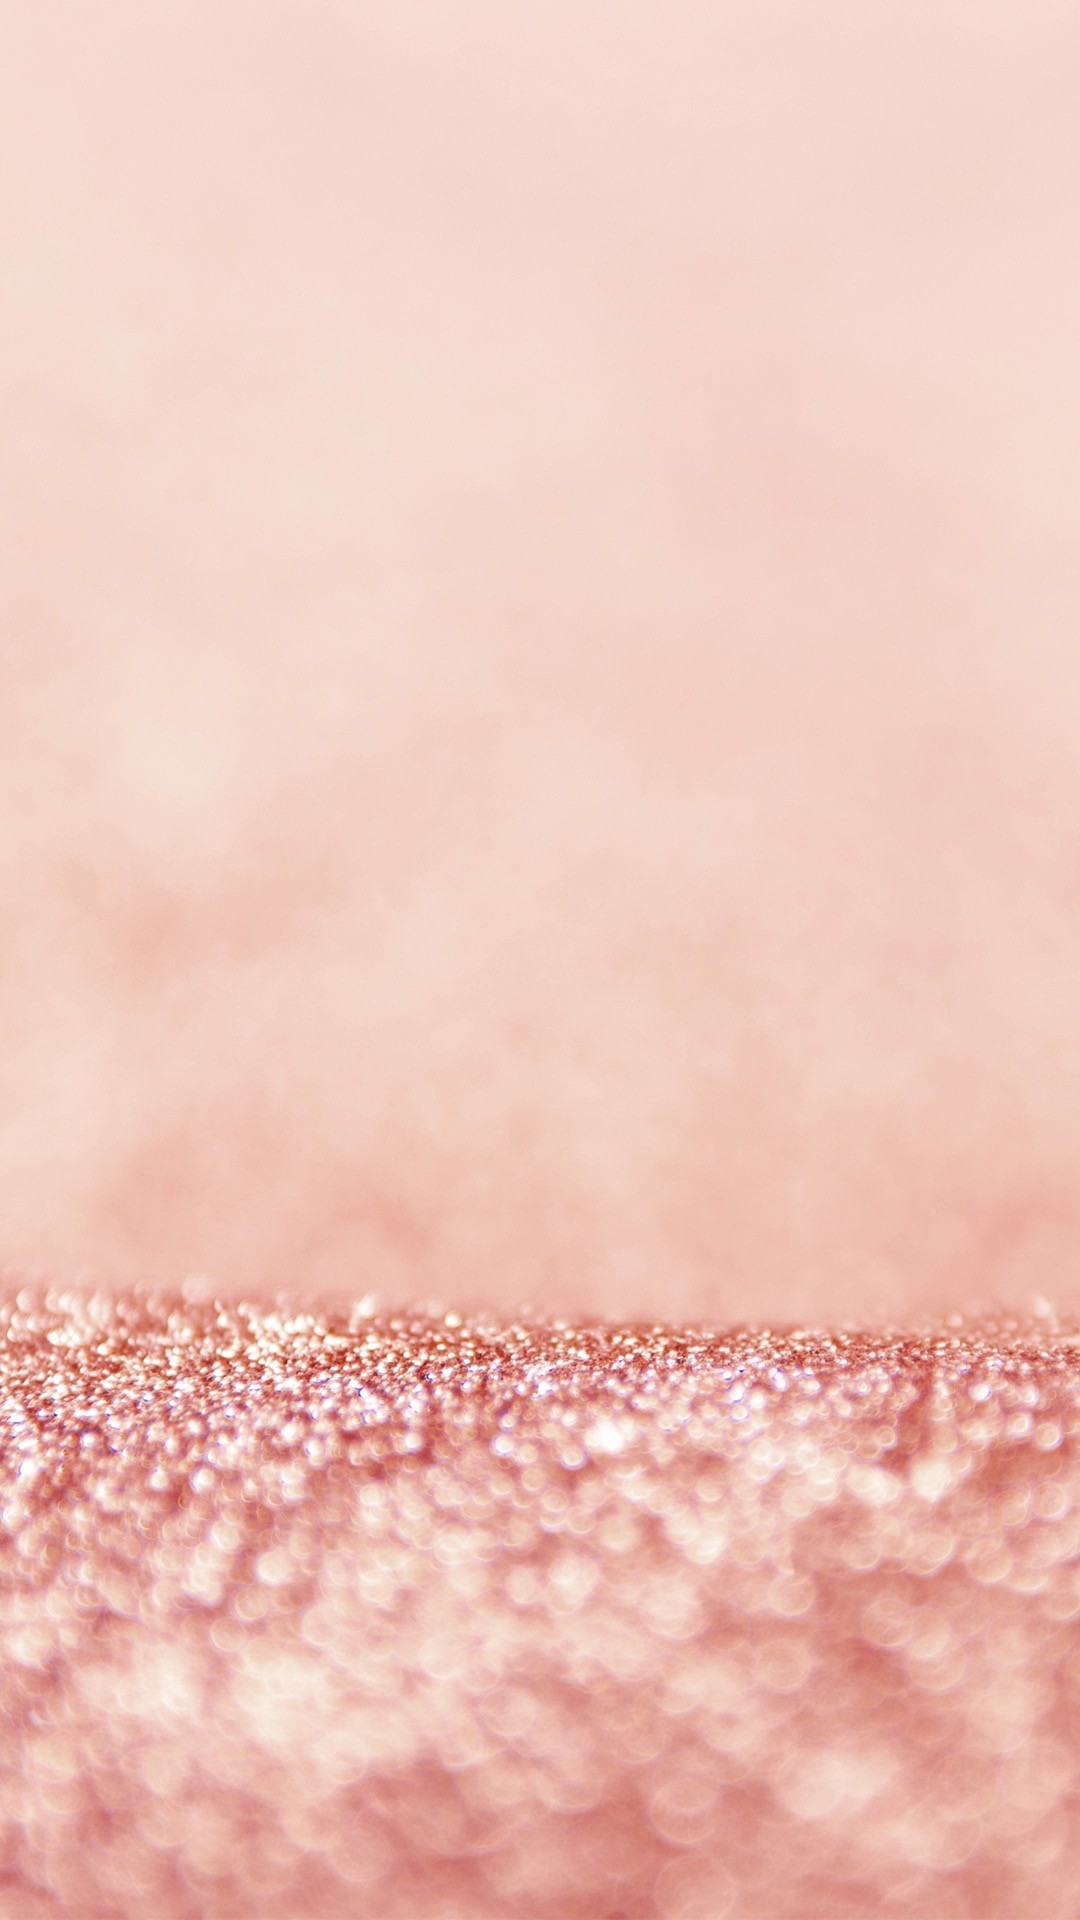 Rose Gold Glitter Wallpaper For iPhone resolution 1080x1920